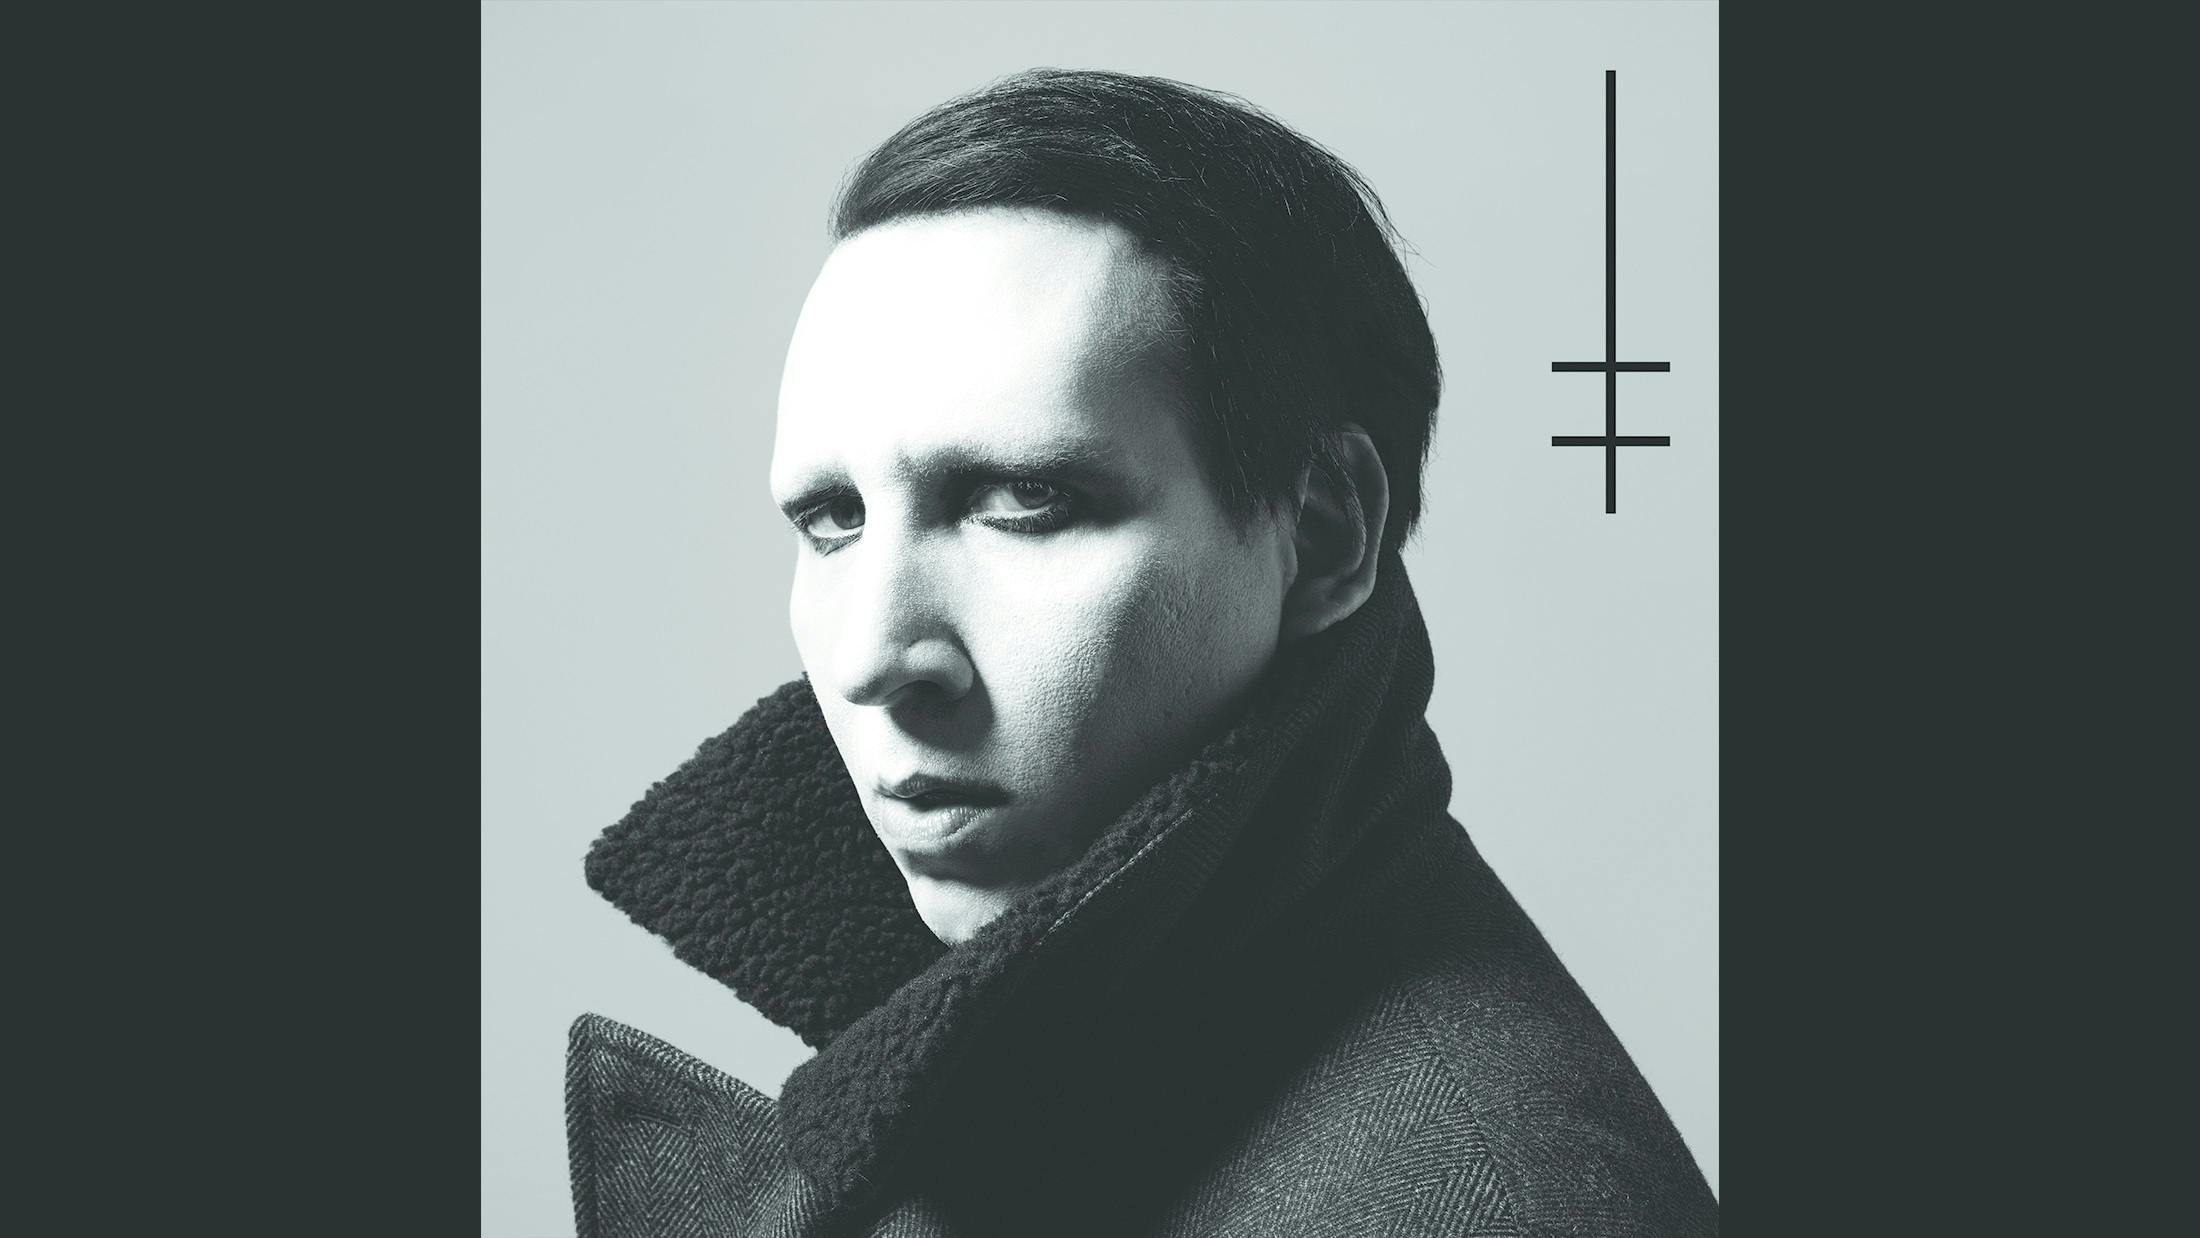 With its spidery verses and venomous, whisper-to-a-scream hooks, Heaven Upside Down was precisely the kind of evil, slithering creature we hoped Marilyn Manson would return with. We’d had glimpses of it on recent albums, but this year’s creative and alternative take on industrial metal was the real deal. Supported, as ever, by some mesmerising and entirely NSFW videos, Manson got into your head with songs about paranoia, sex and religion. SAY10 lurched violently, while the dark electro rock of KILL4ME bobbed along, loose-limbed and enticing. Then there were odd tracks like Saturnalia, which sounded like a classic Alice Cooper song reanimated for a new generation. The God of Fuck kept everything unpredictable, provoking further listens. Once considered a genuine threat to American society, it was awesome to have old Mazza back in such insidious, devilish form.